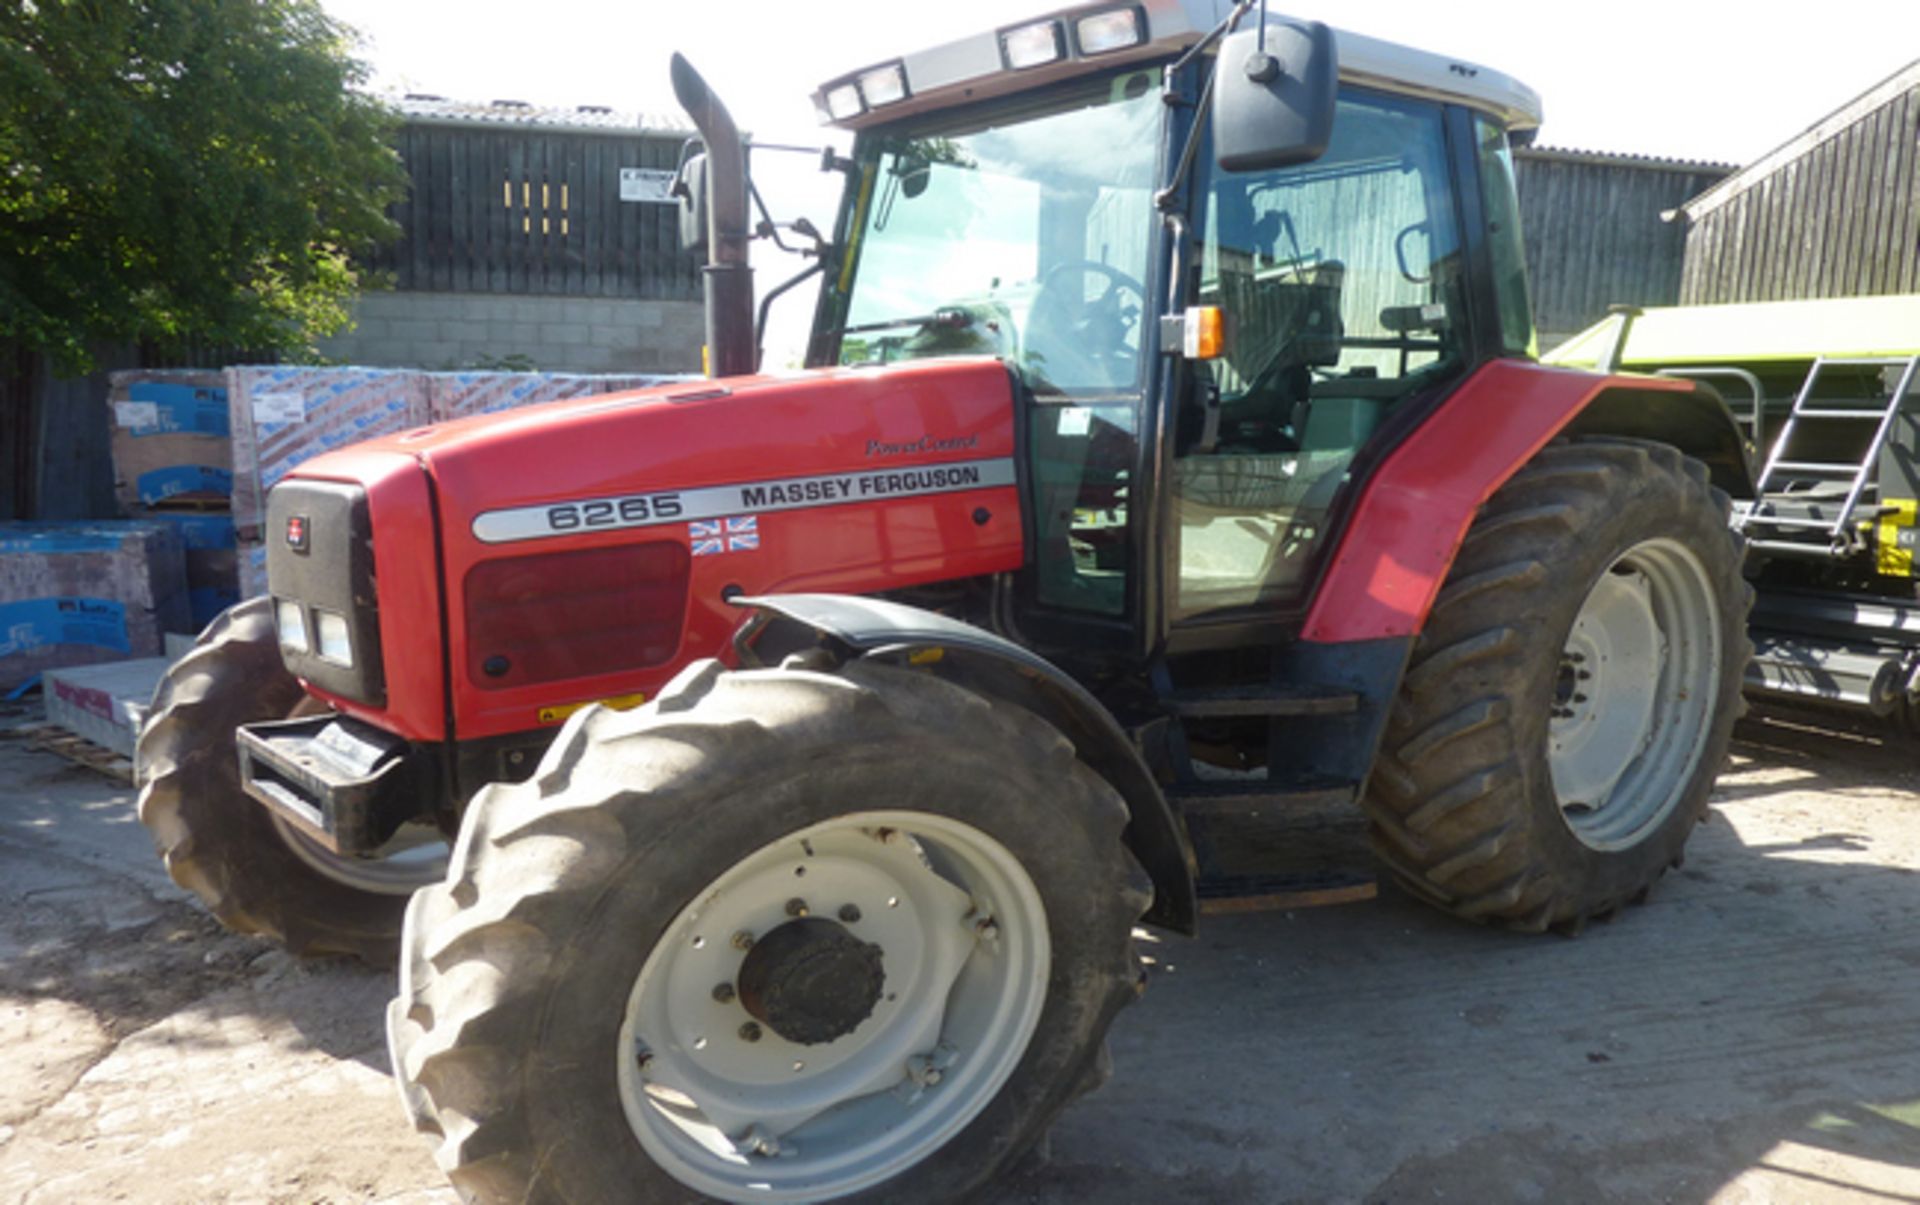 5002 MF 6265 Power Control 4wd tractor, 40km/hr, 5214 hrs, FX03 FXP - Image 2 of 5